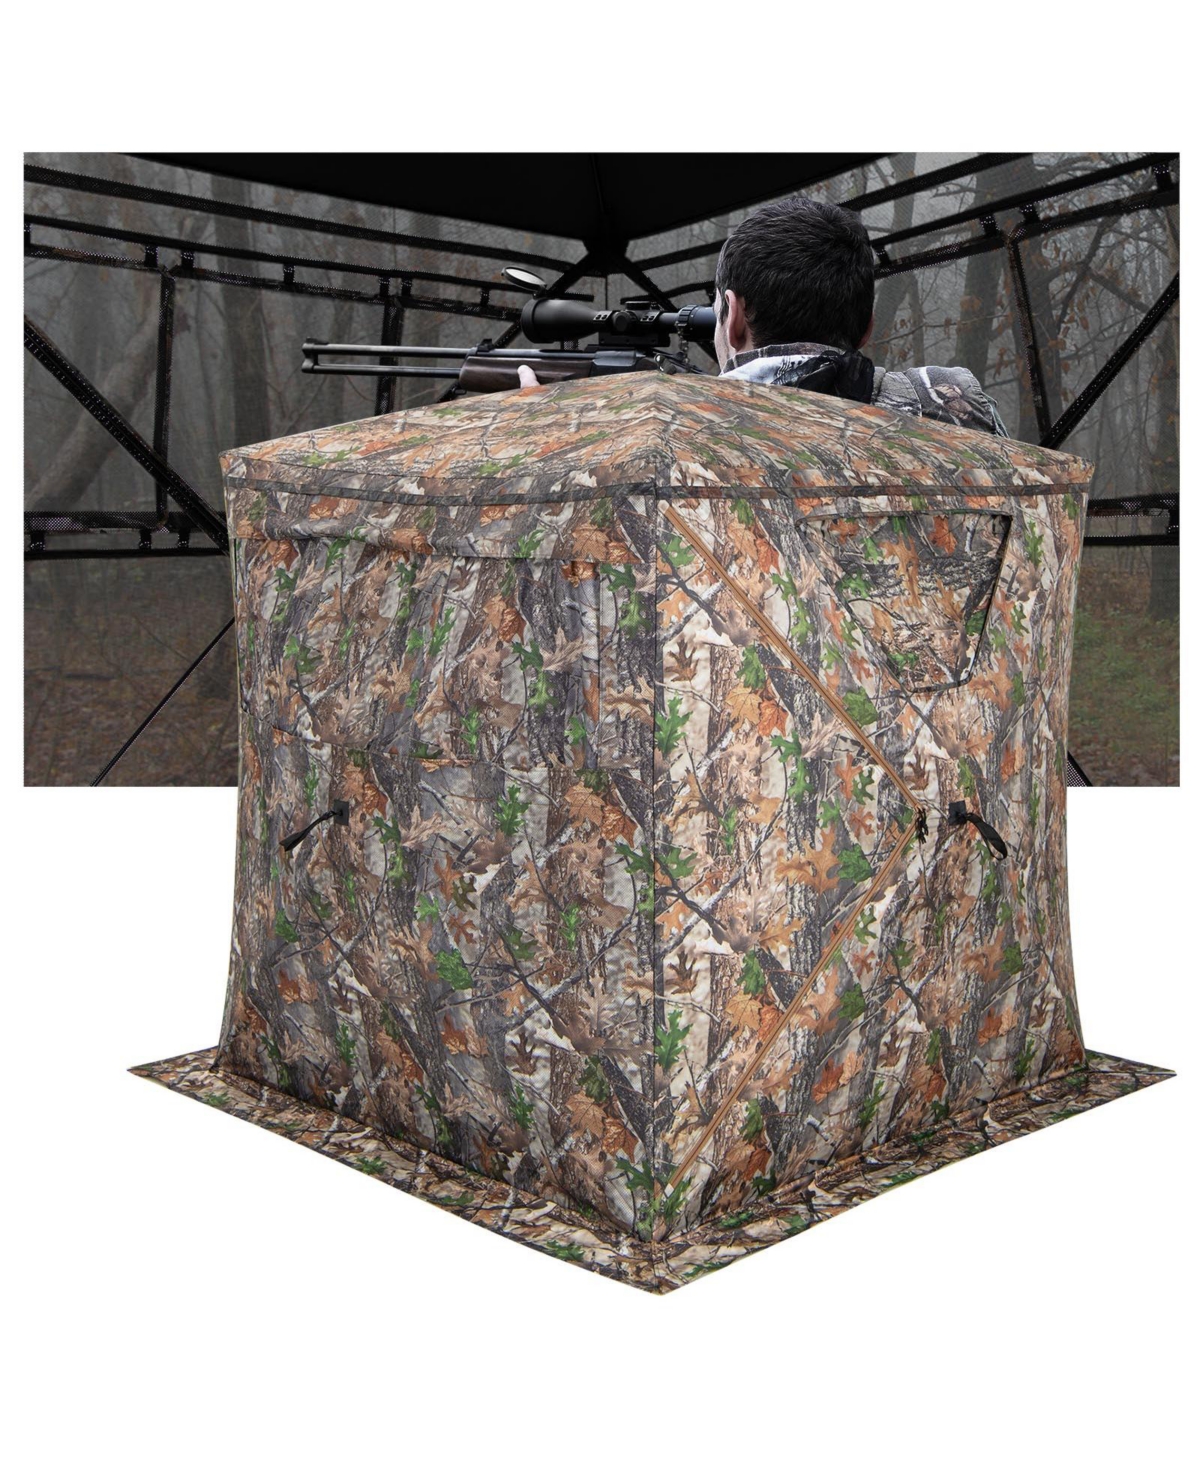 Hunting Blind Portable Pop Up Ground Tent 2-3 Person with Carry Bag Storage Pocket - Green